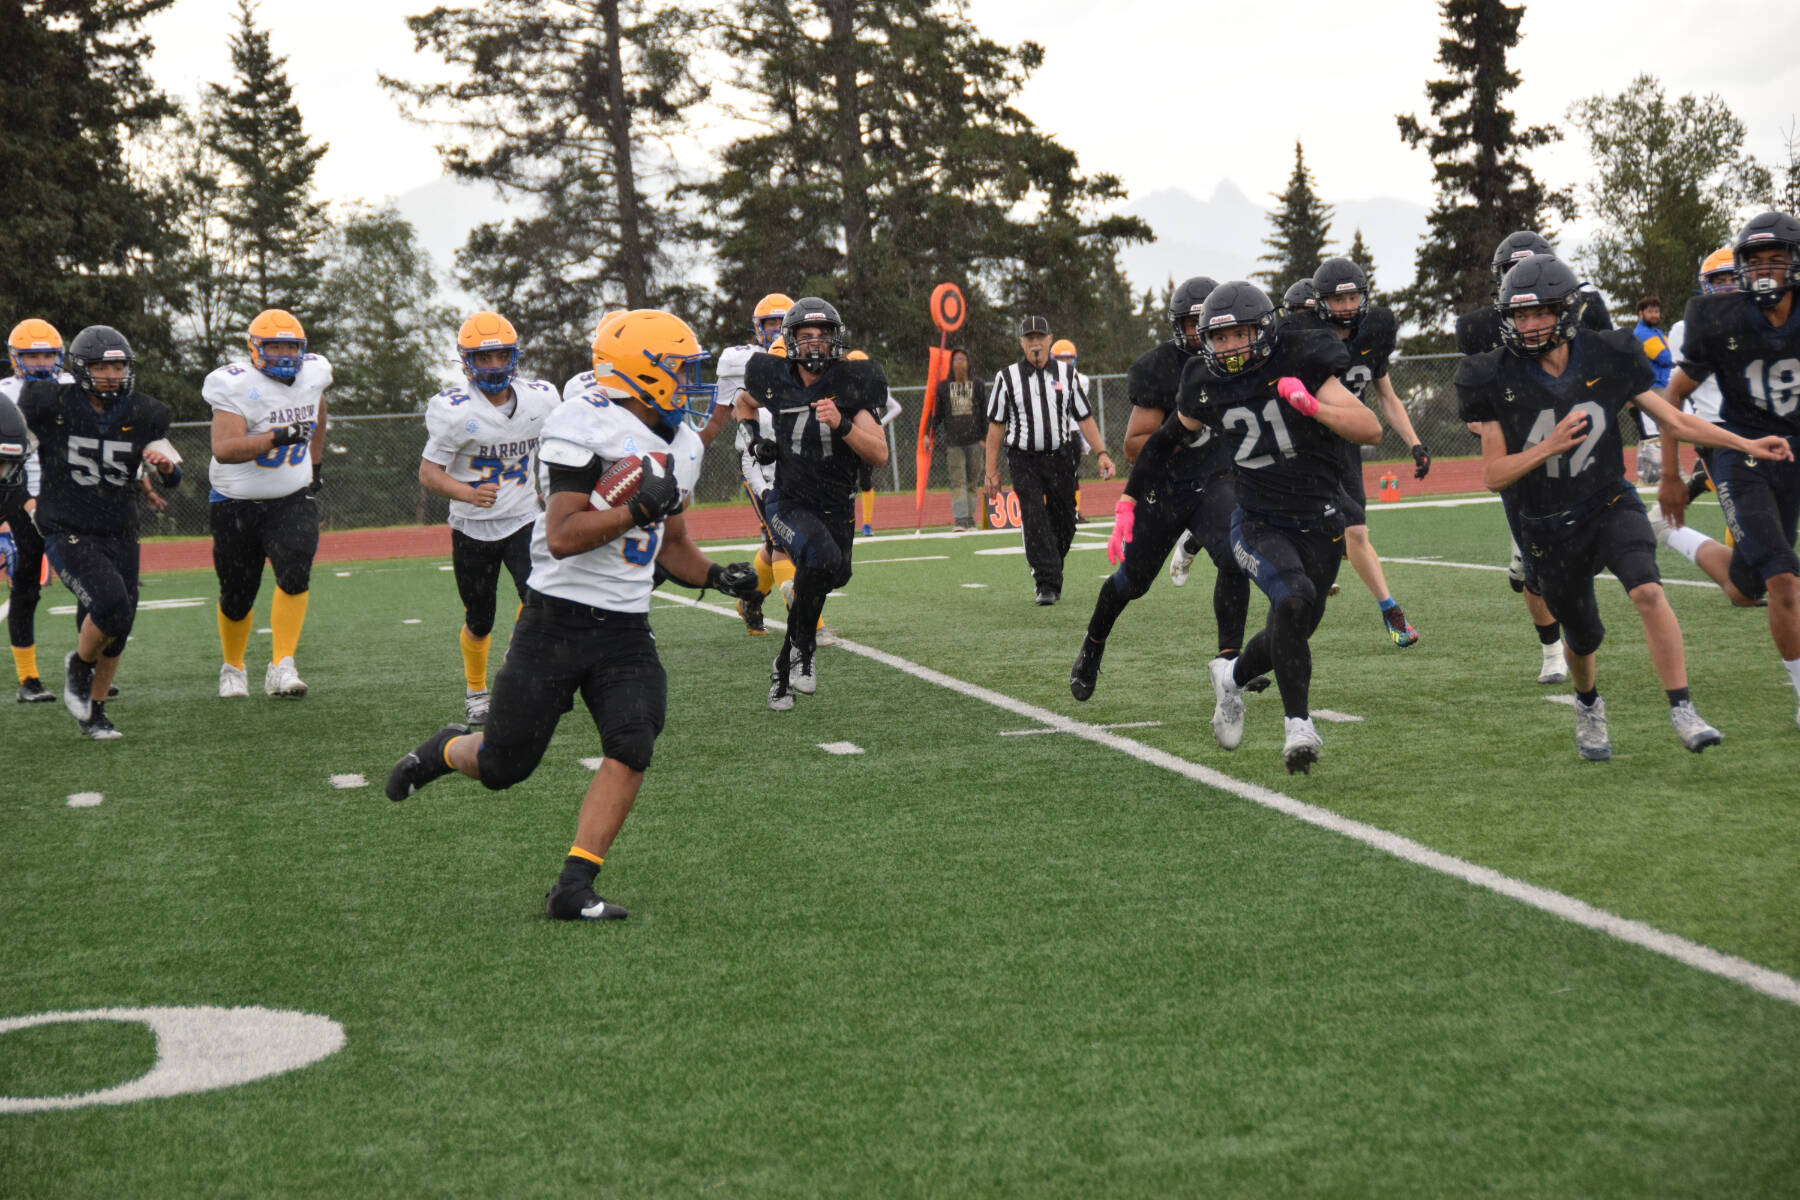 Barrow’s Gabriel Ortilla faces off against incoming Mariners in the fourth quarter of the home opener game on Saturday, Aug. 12, 2023 in Homer, Alaska. (Delcenia Cosman/Homer News)